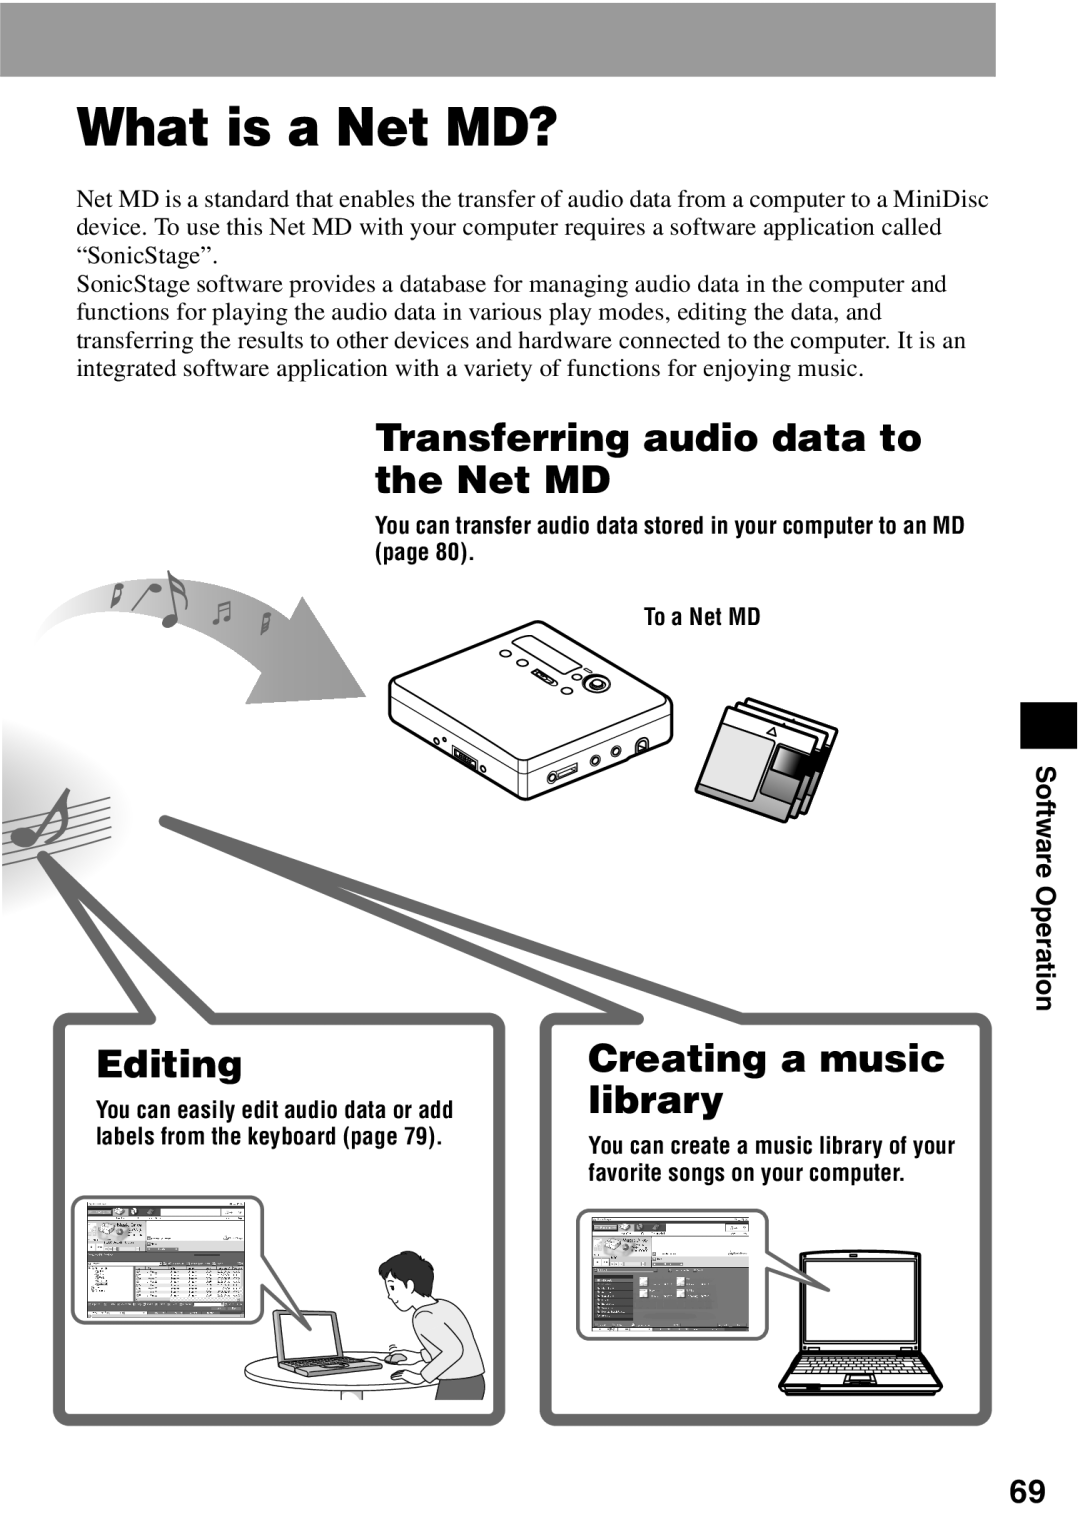 Sony MZ-N510 What is a Net MD?, Transferring audio data to the Net MD, Editing, Creating a music library, To a Net MD 